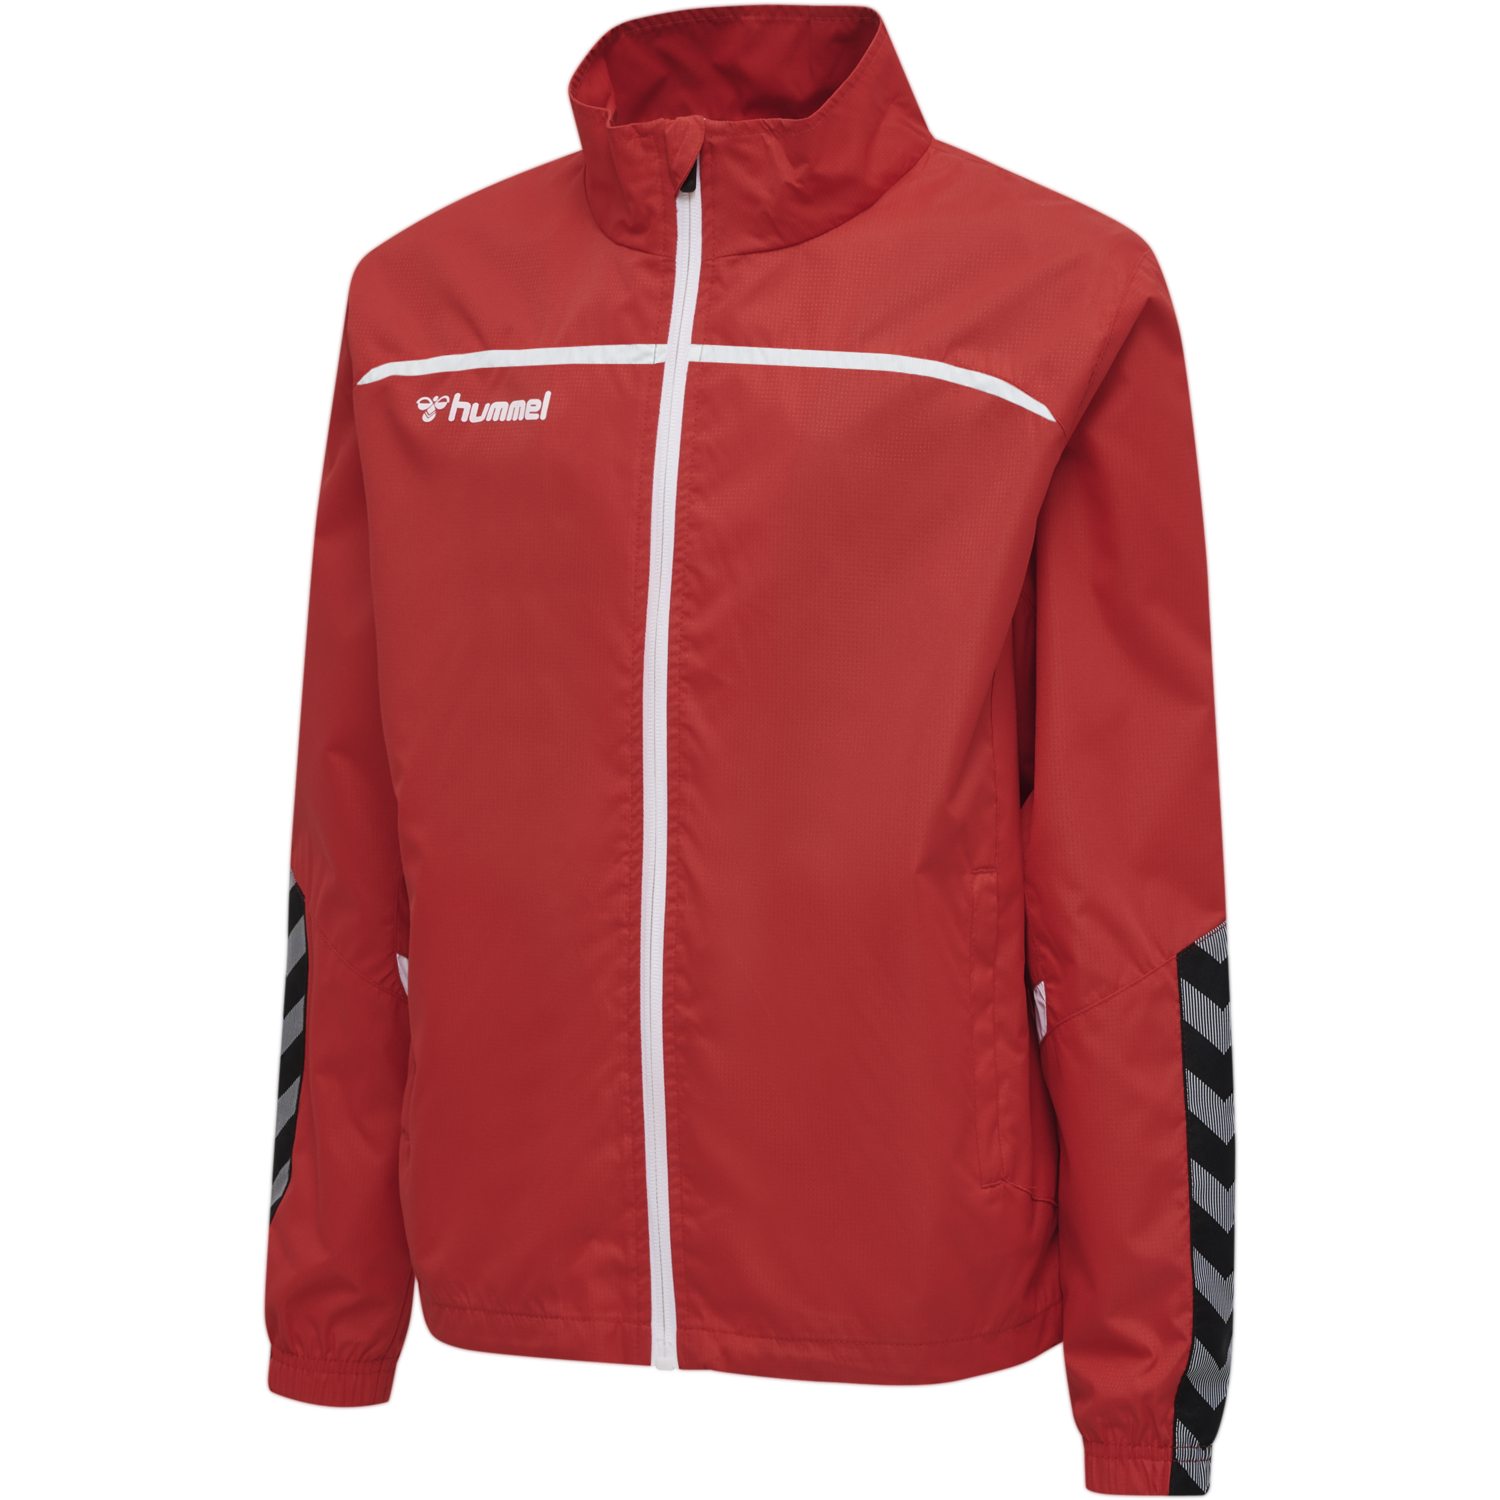 Details about   TOMBO RED & BLACK RUNNING JACKET 